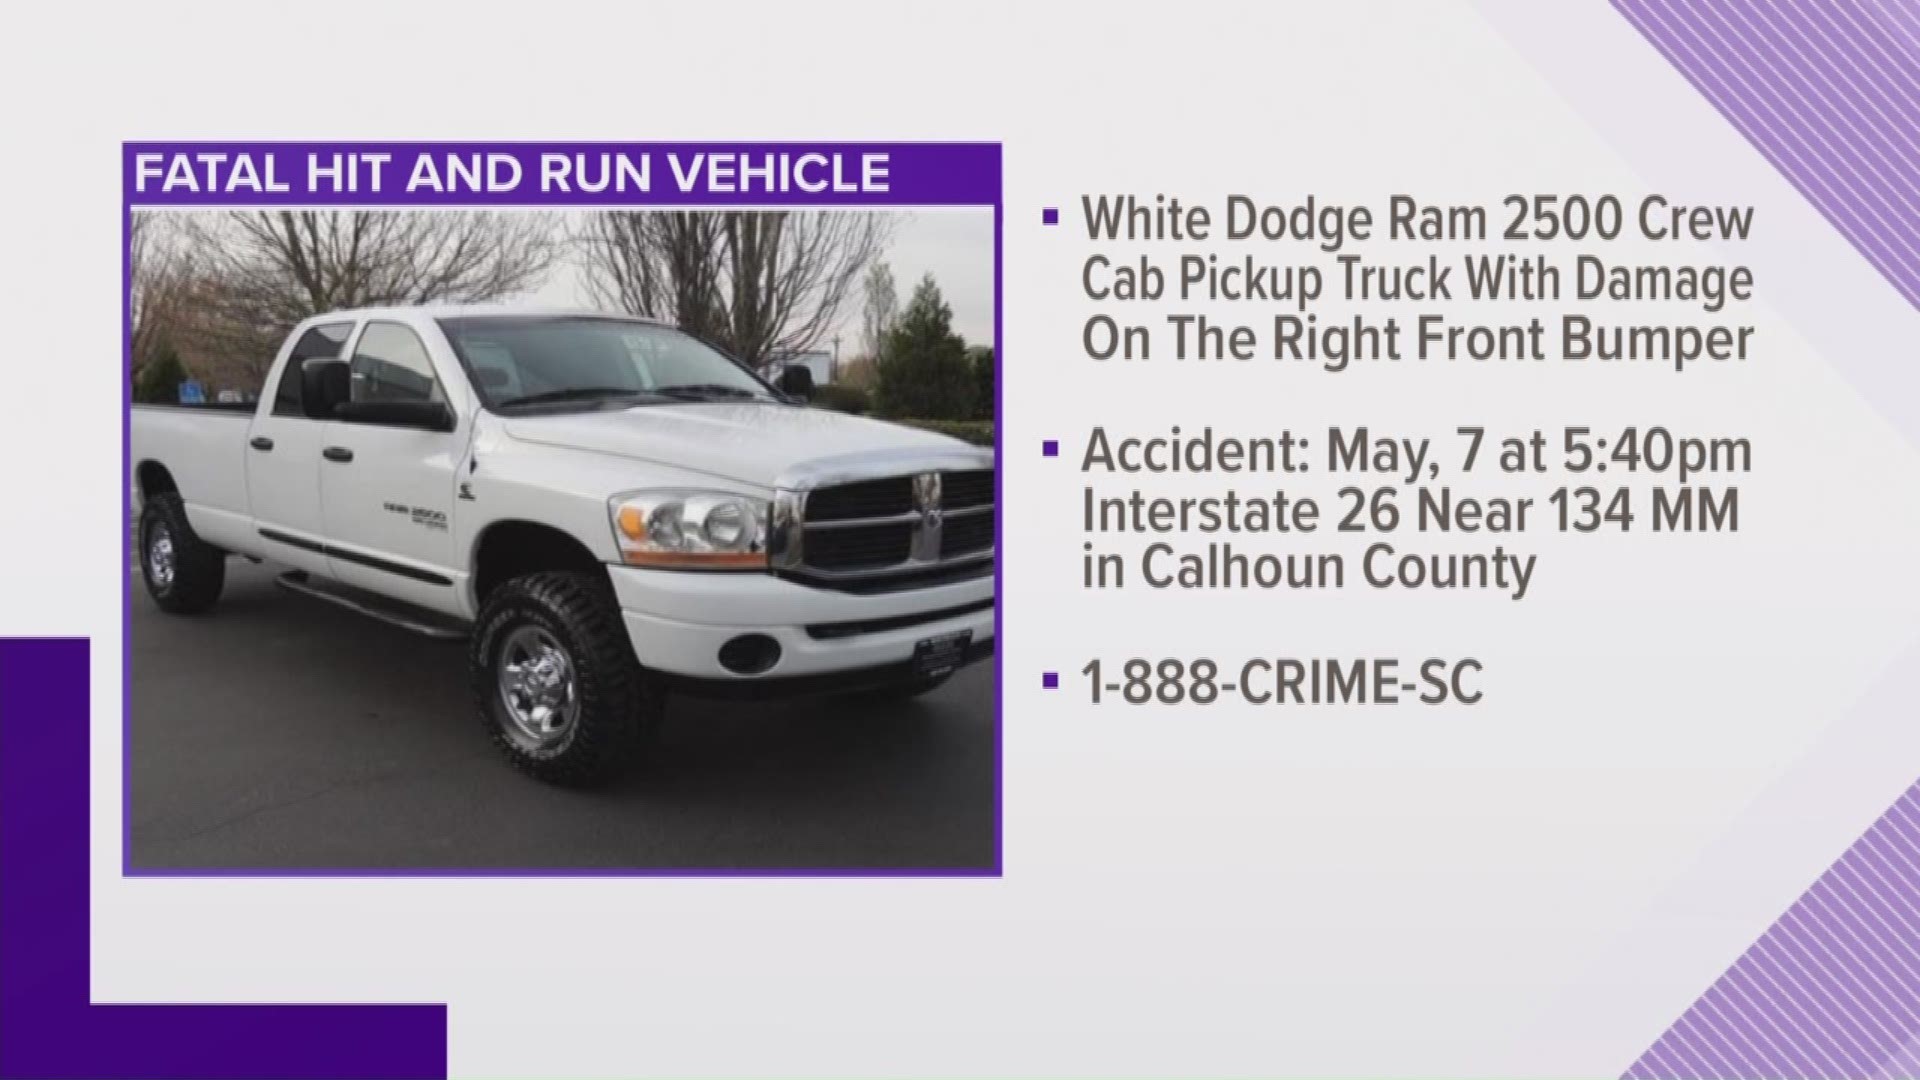 S.C. Highway Patrol needs your help to solve a 2-year-old hit and run crash that killed one in Calhoun County in May of 2016.